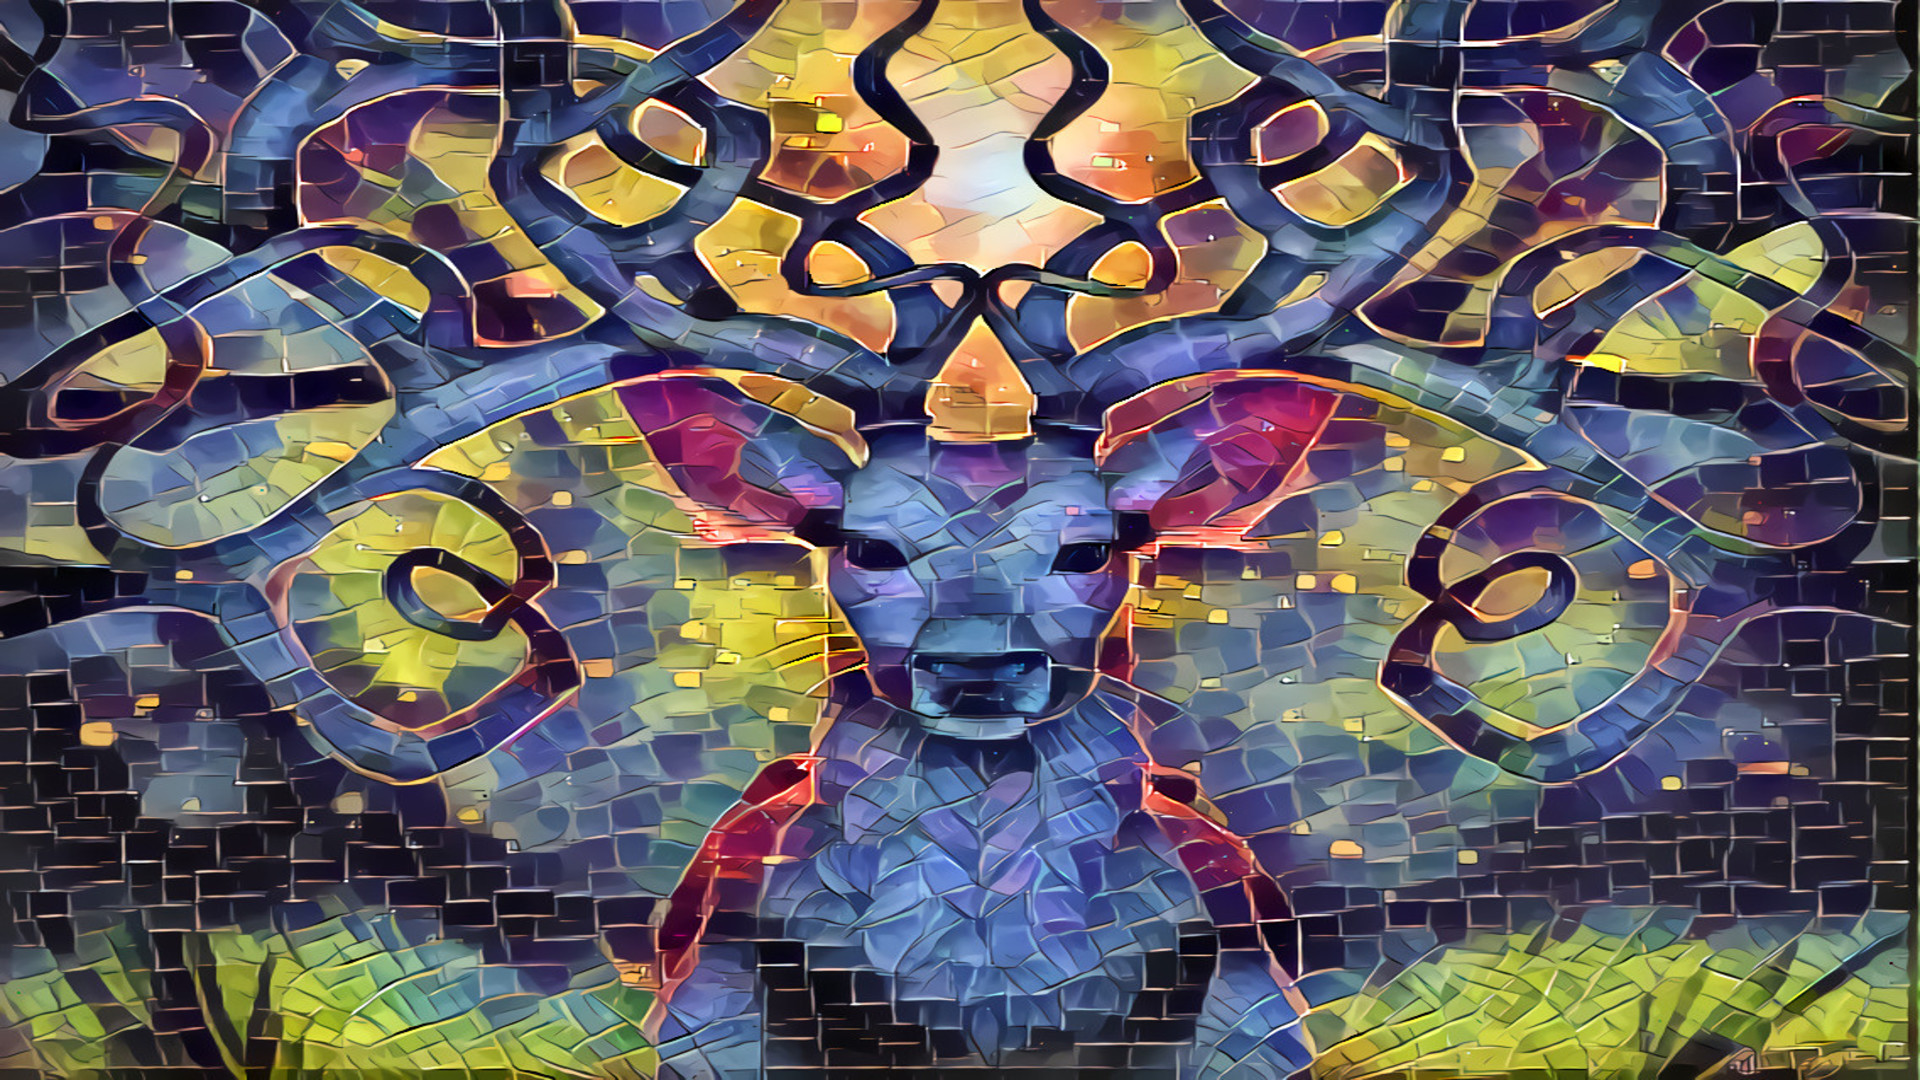 This is a creative piece of art which I created out of a simple deer image, hope u like it :) by NatureWorshiper